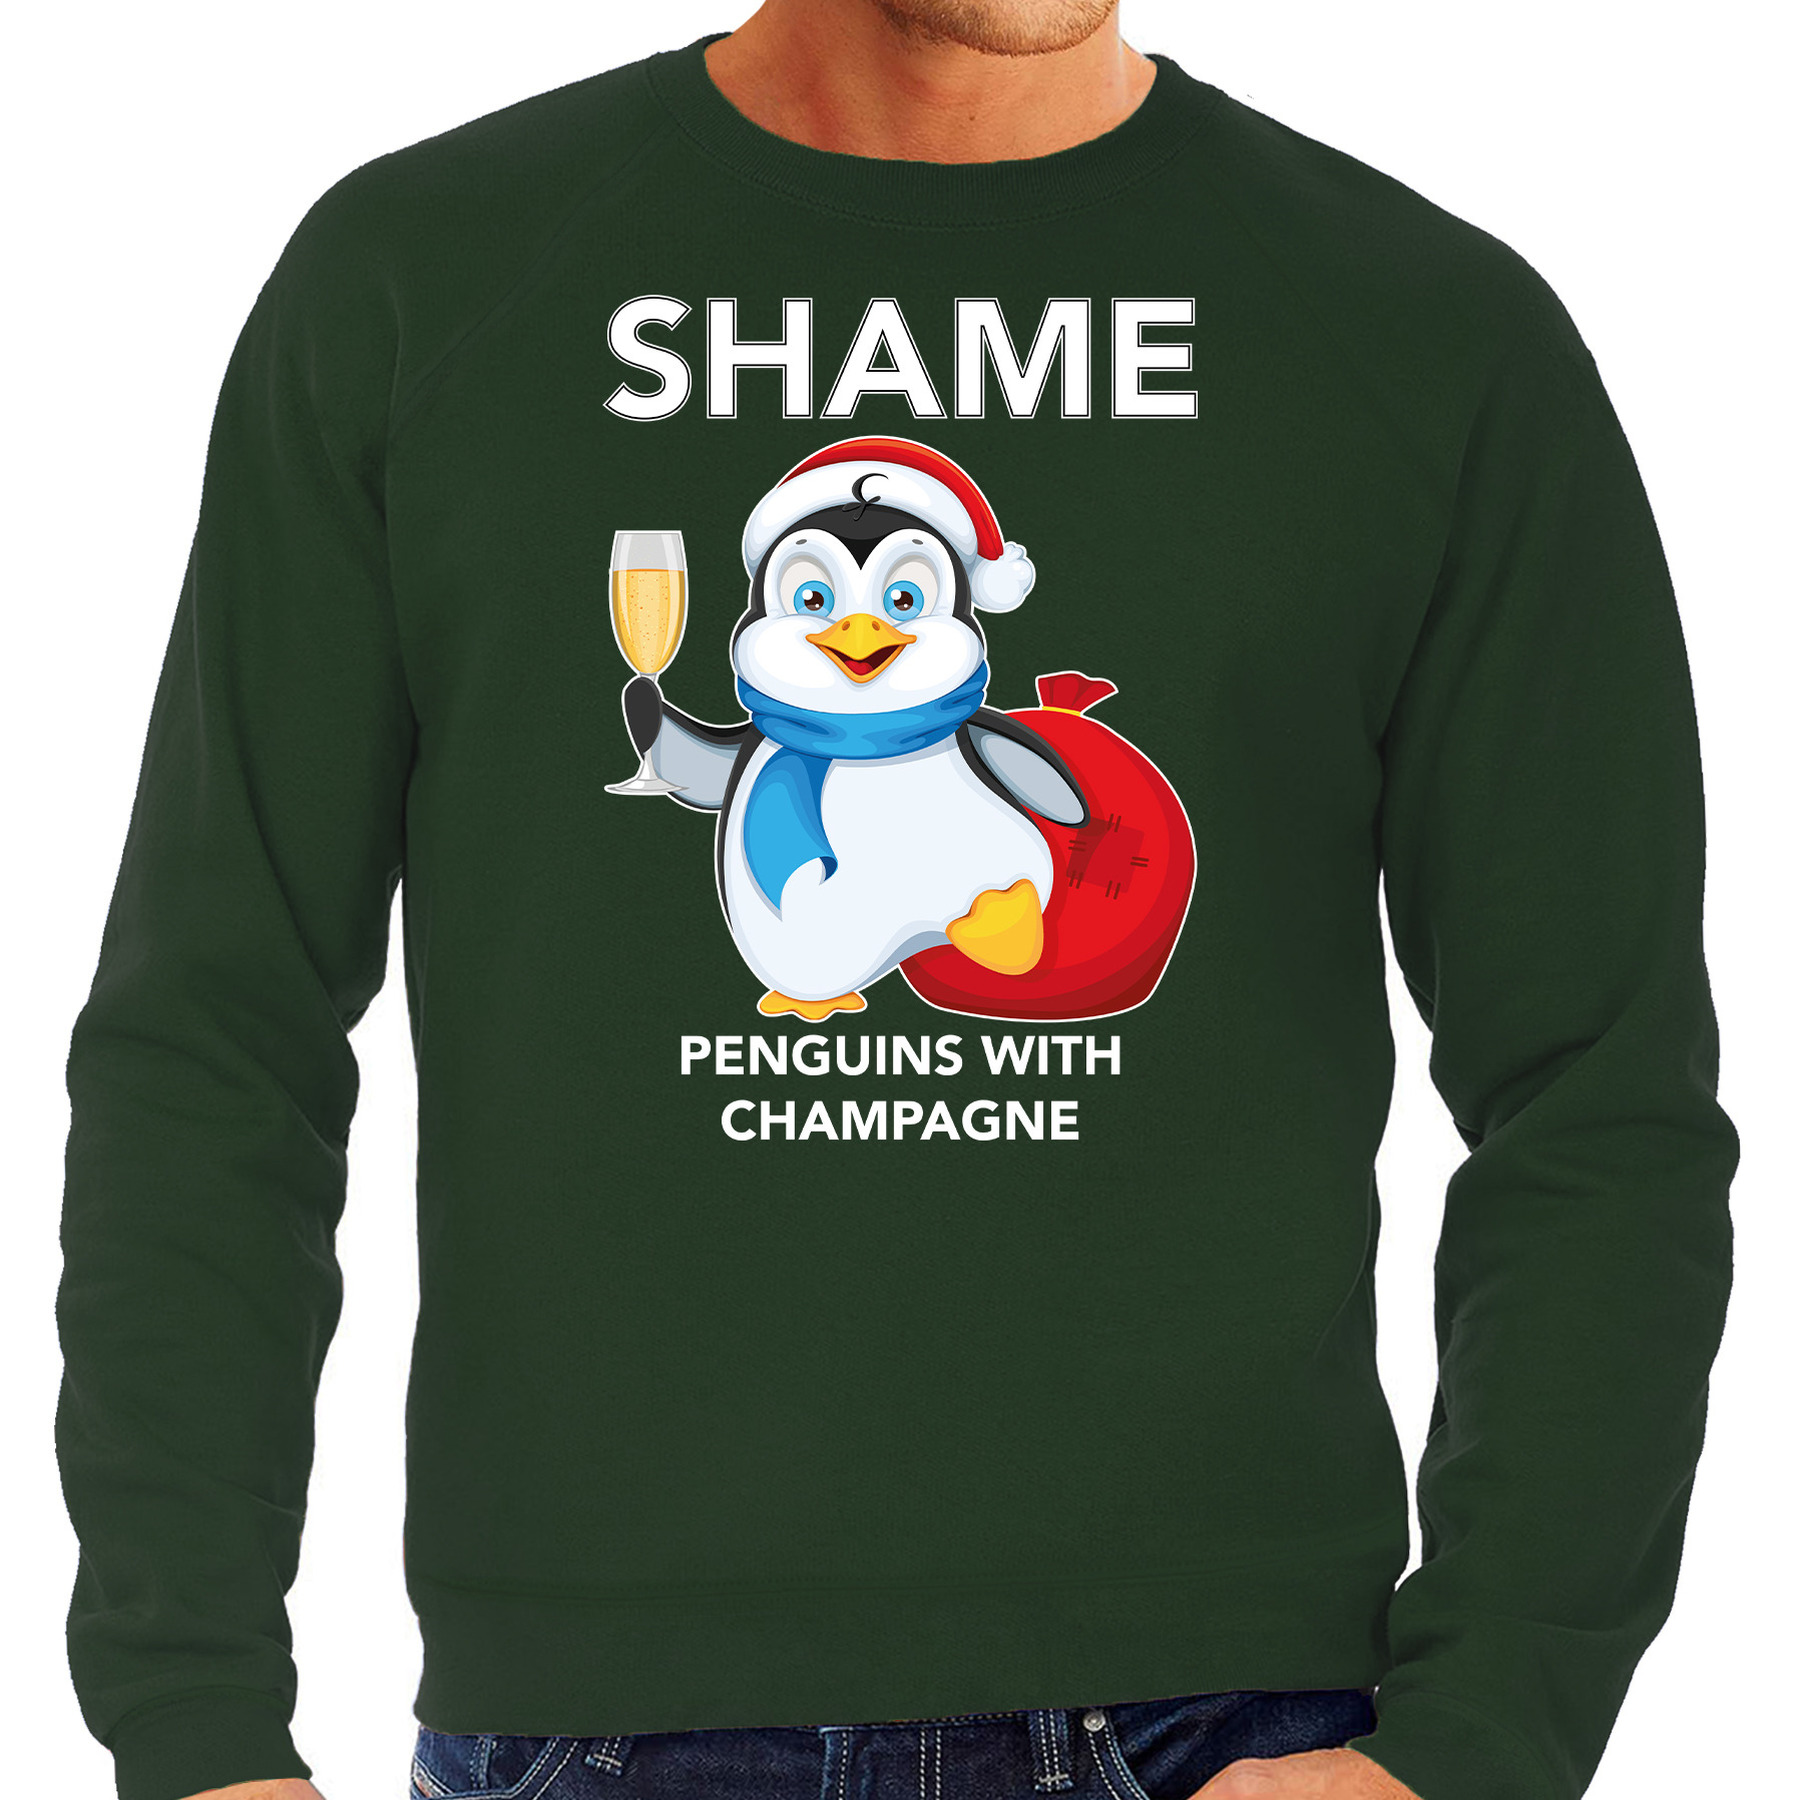 Pinguin Kersttrui-outfit Shame penguins with champagne groen voor heren